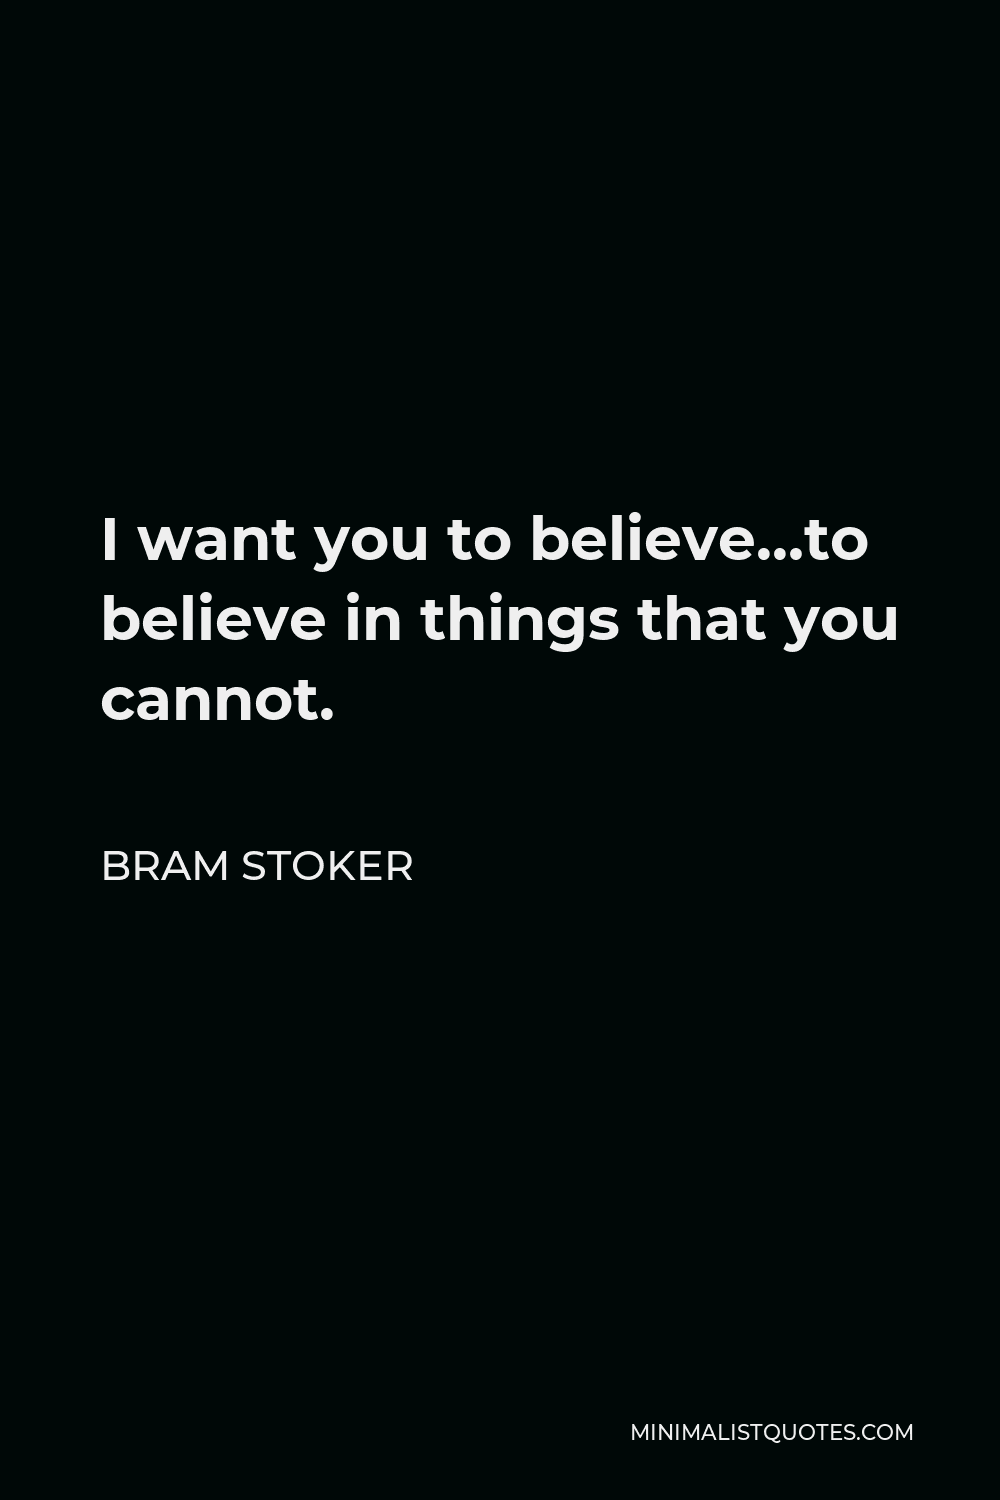 Bram Stoker Quote - I want you to believe…to believe in things that you cannot.